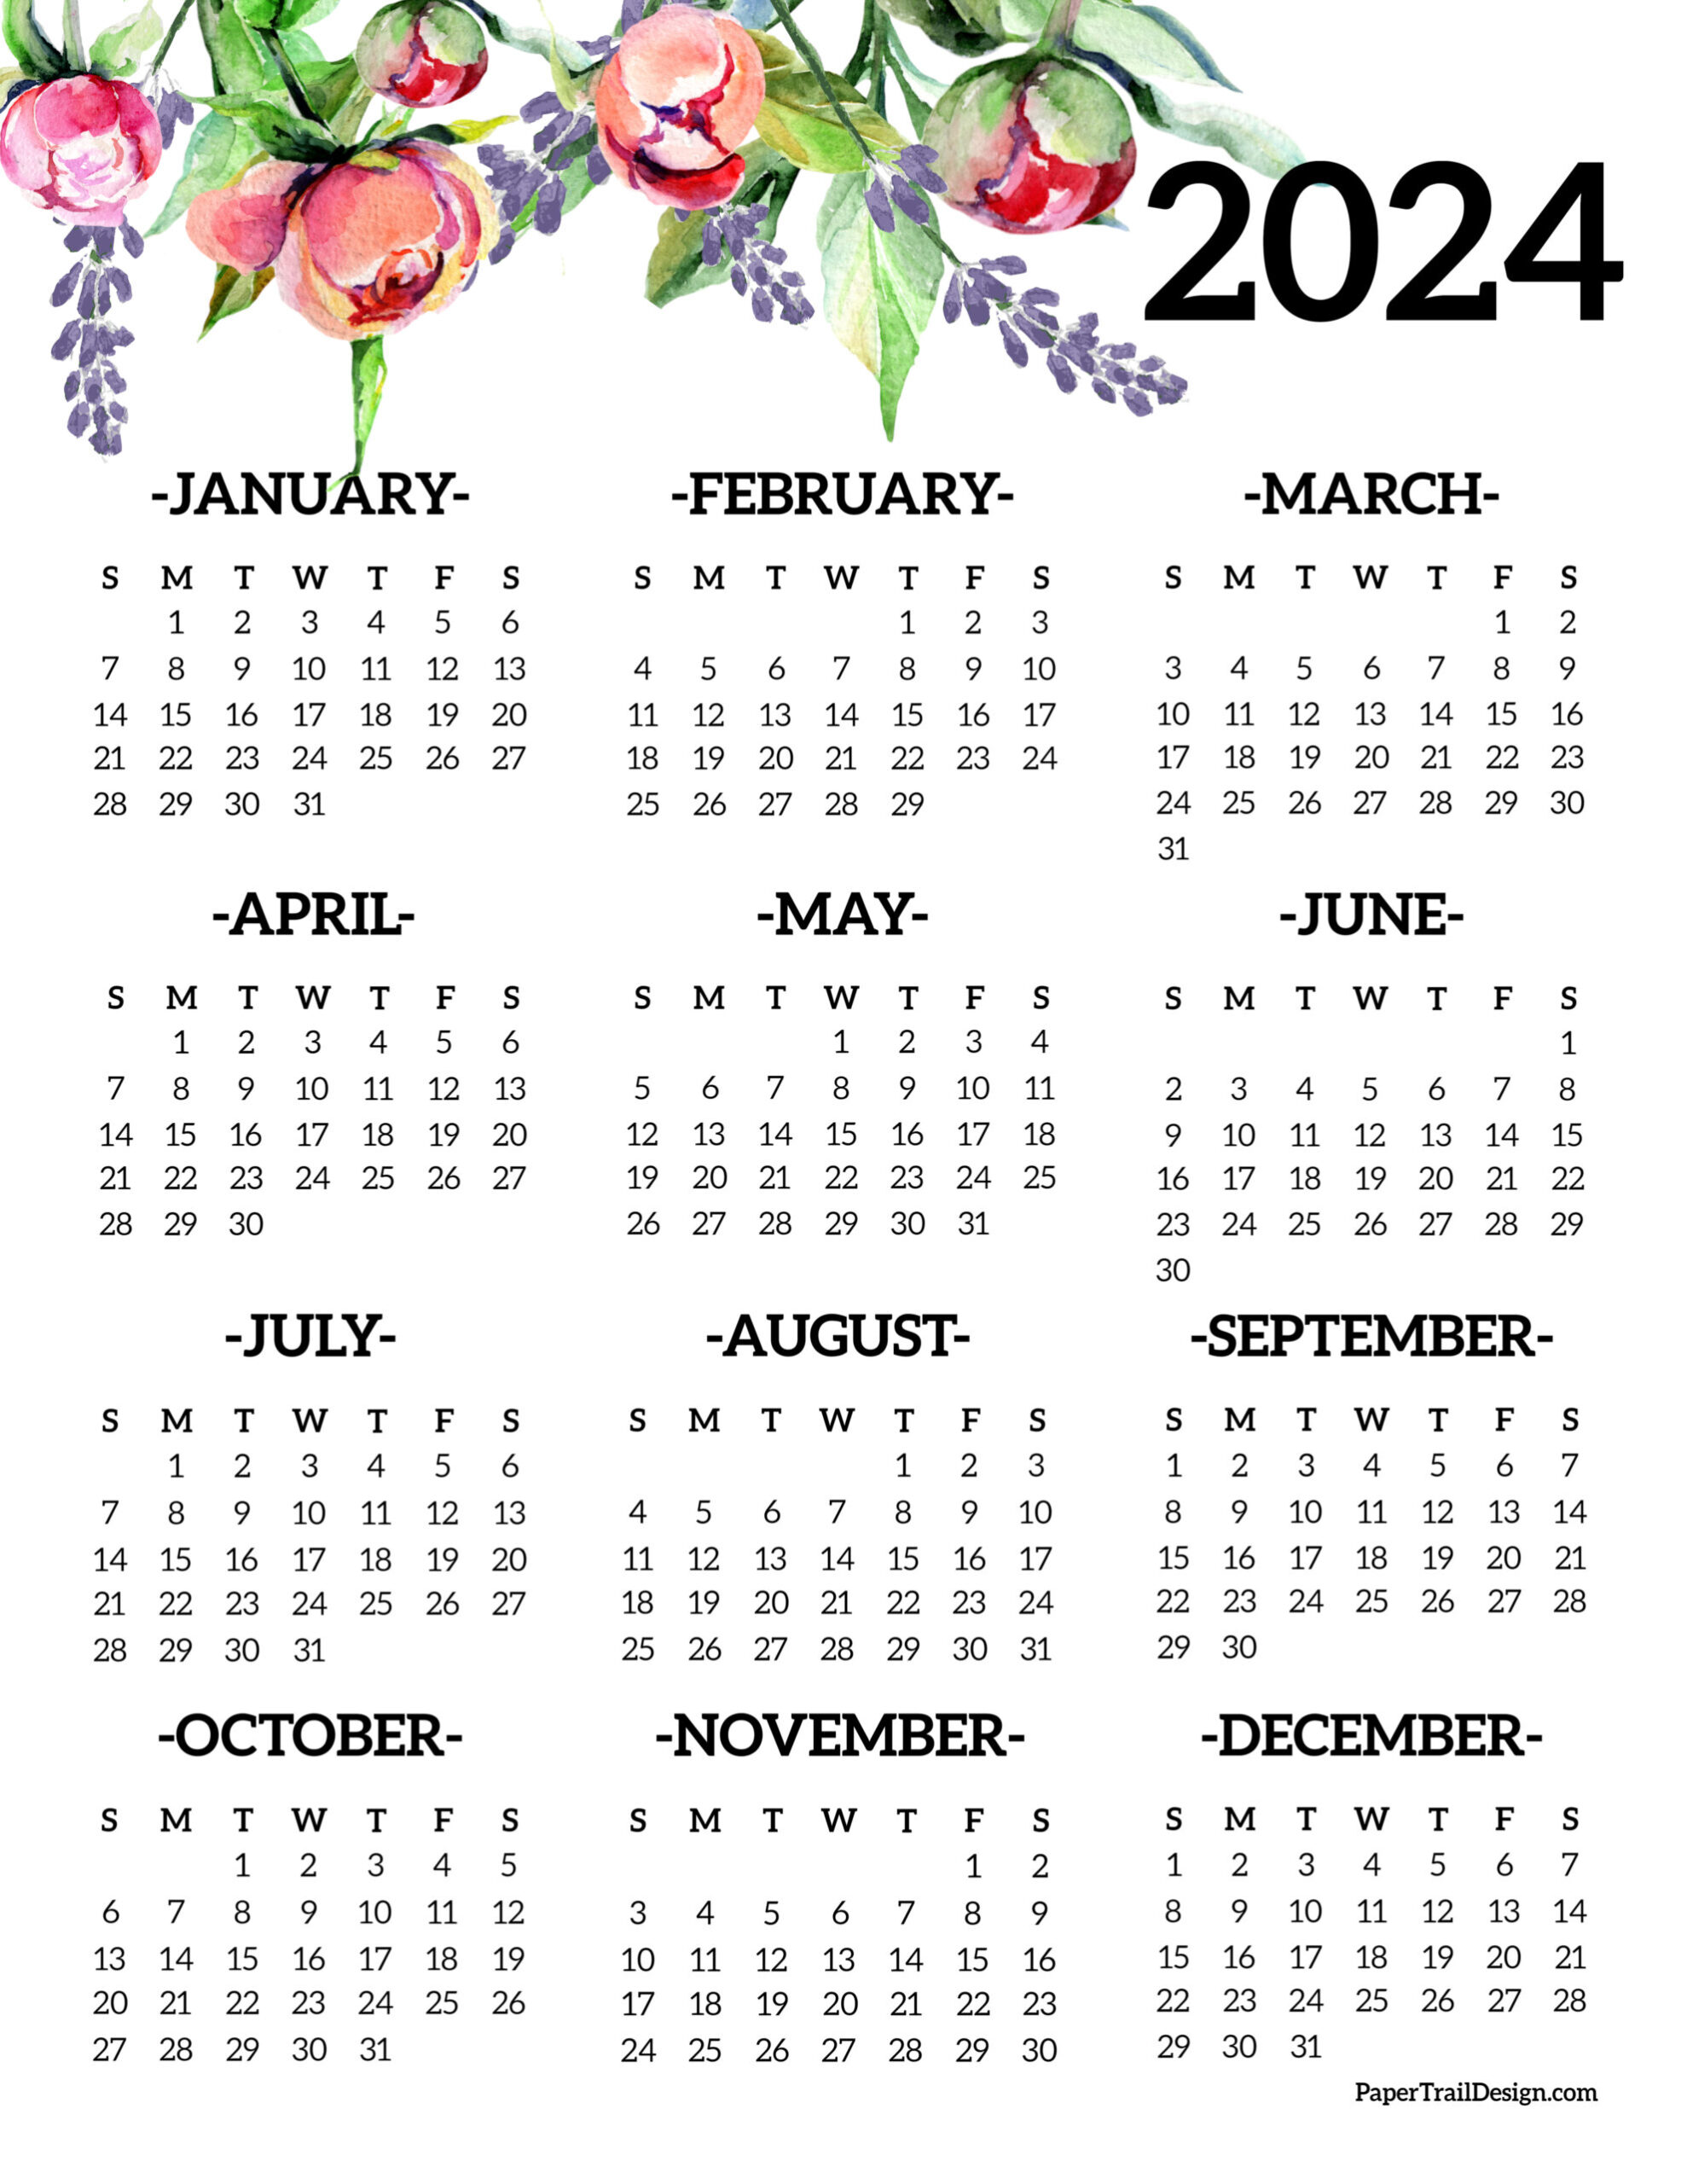 Calendar 2024 Printable One Page - Paper Trail Design for Printable Calendar 2024 Year At A Glance